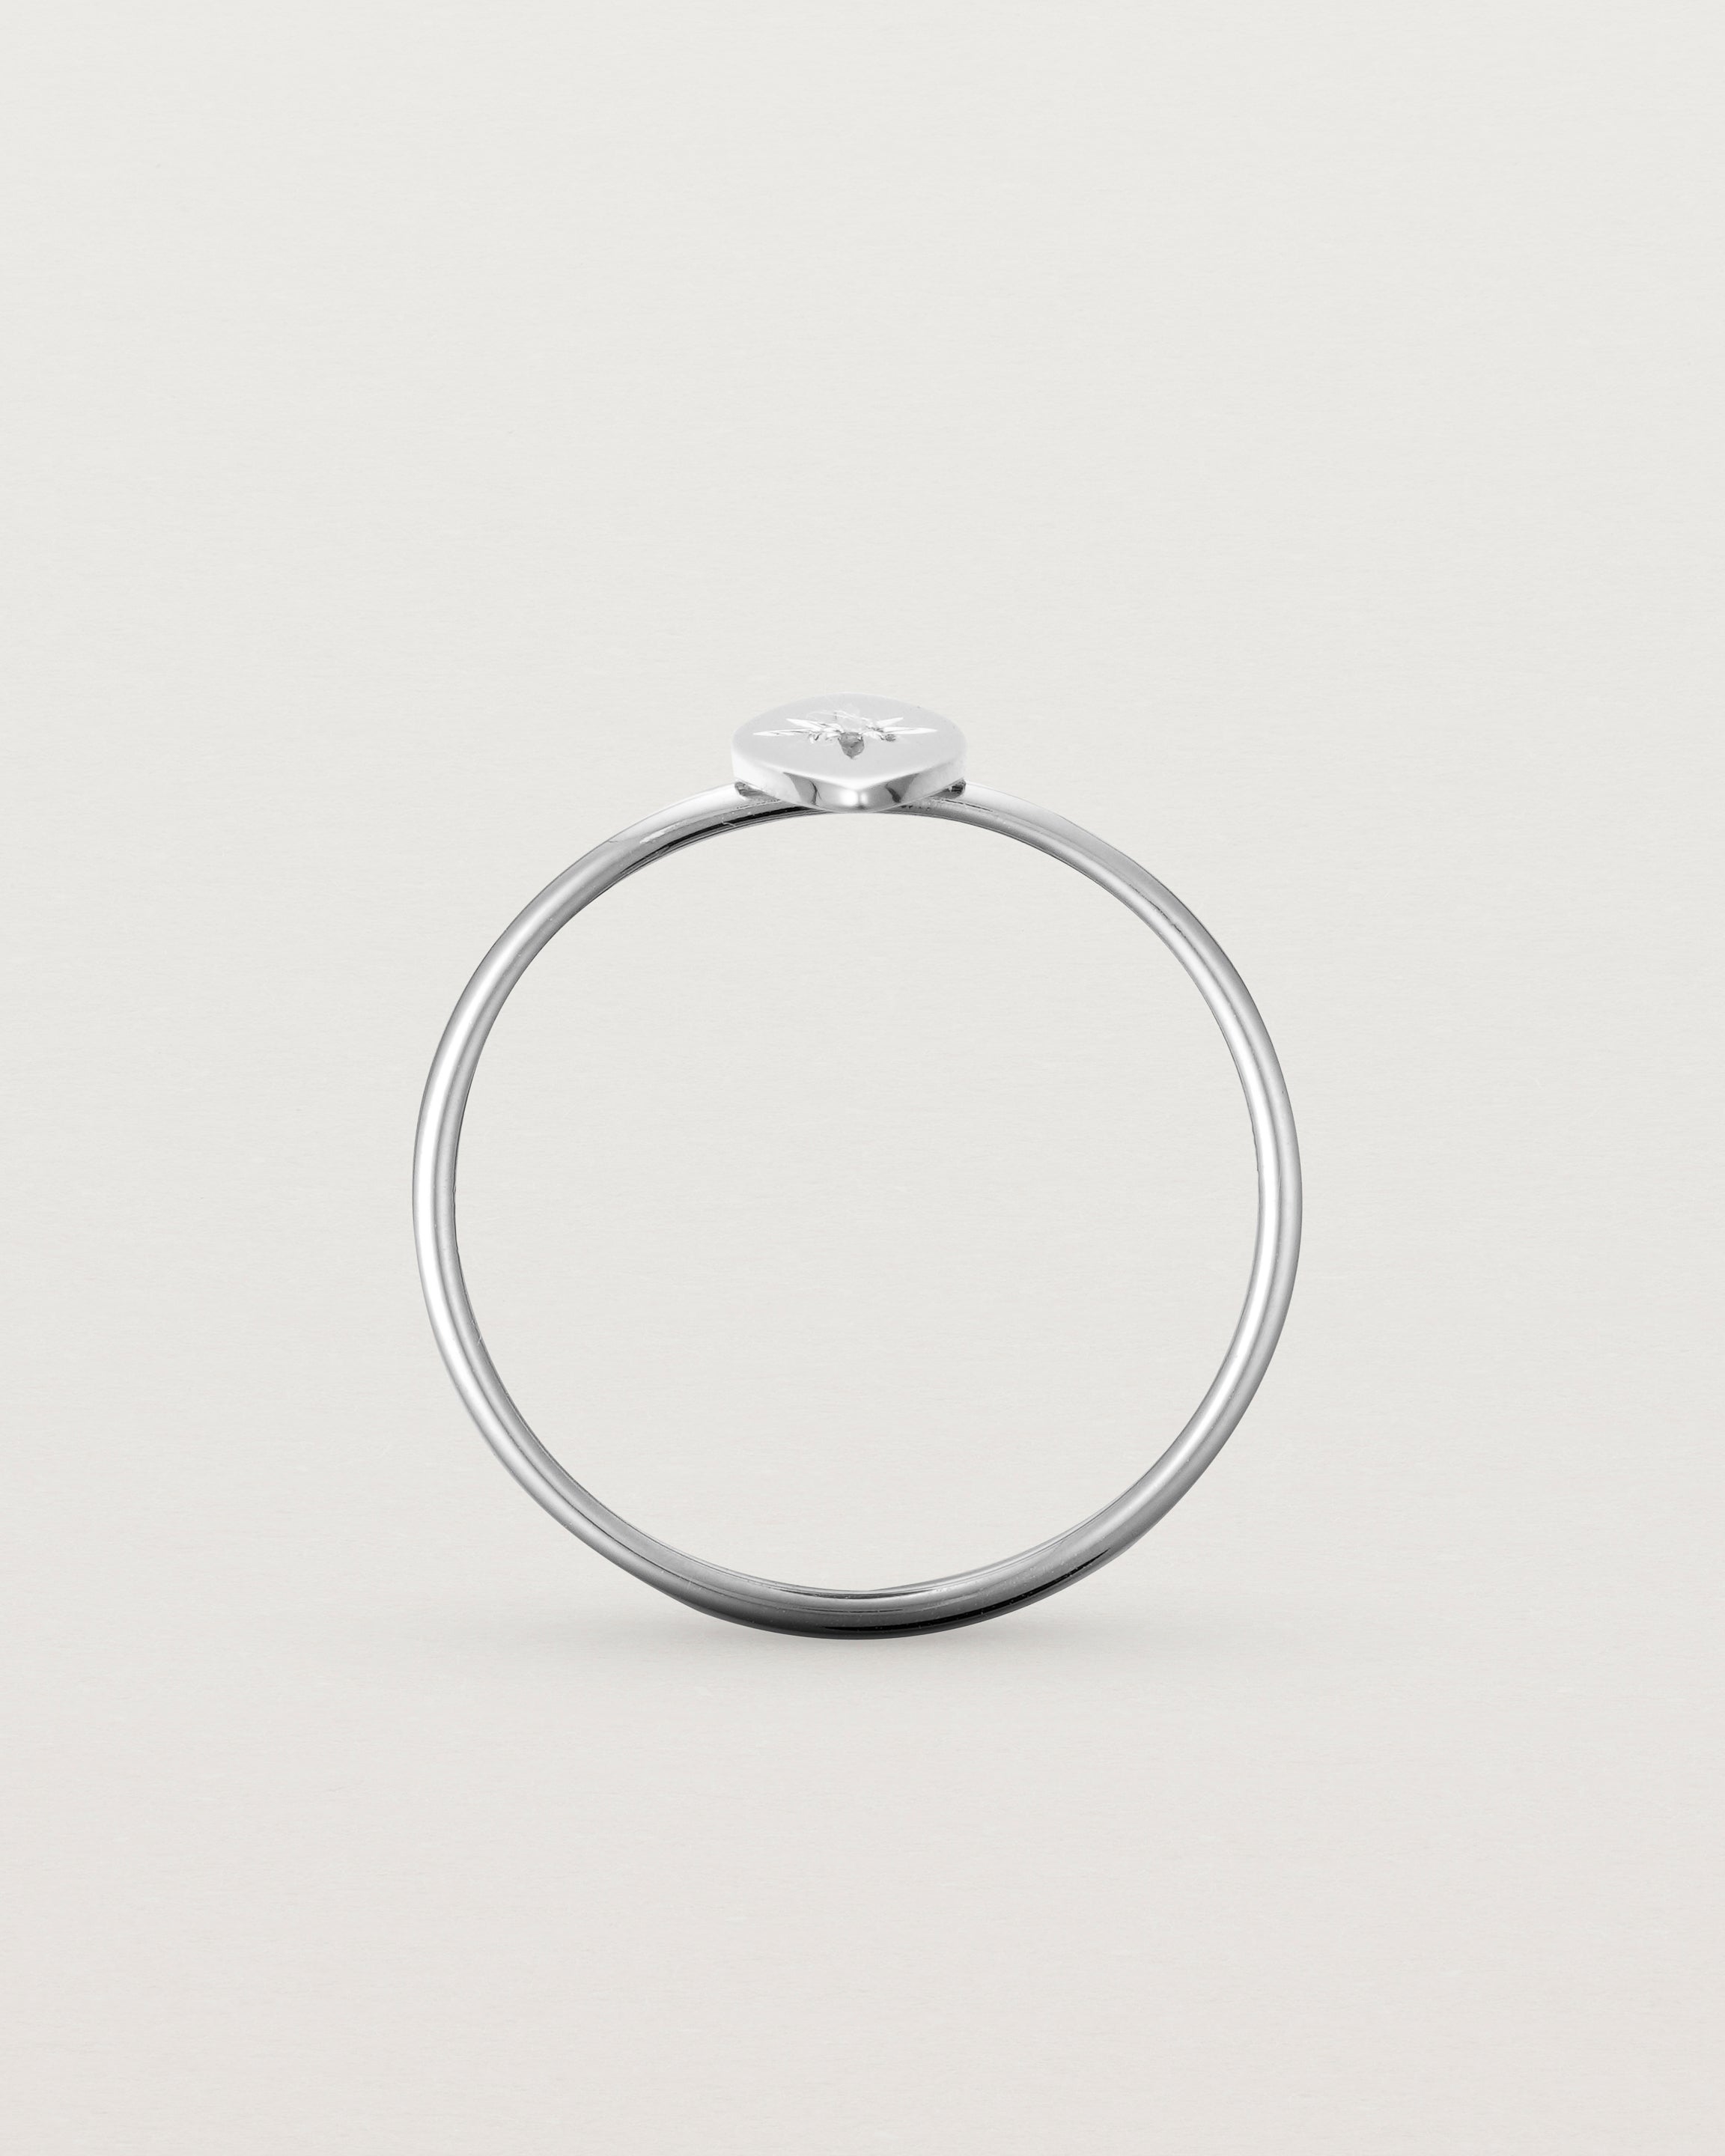 Standing view of the Willow Ring | Birthstone | Sterling Silver.